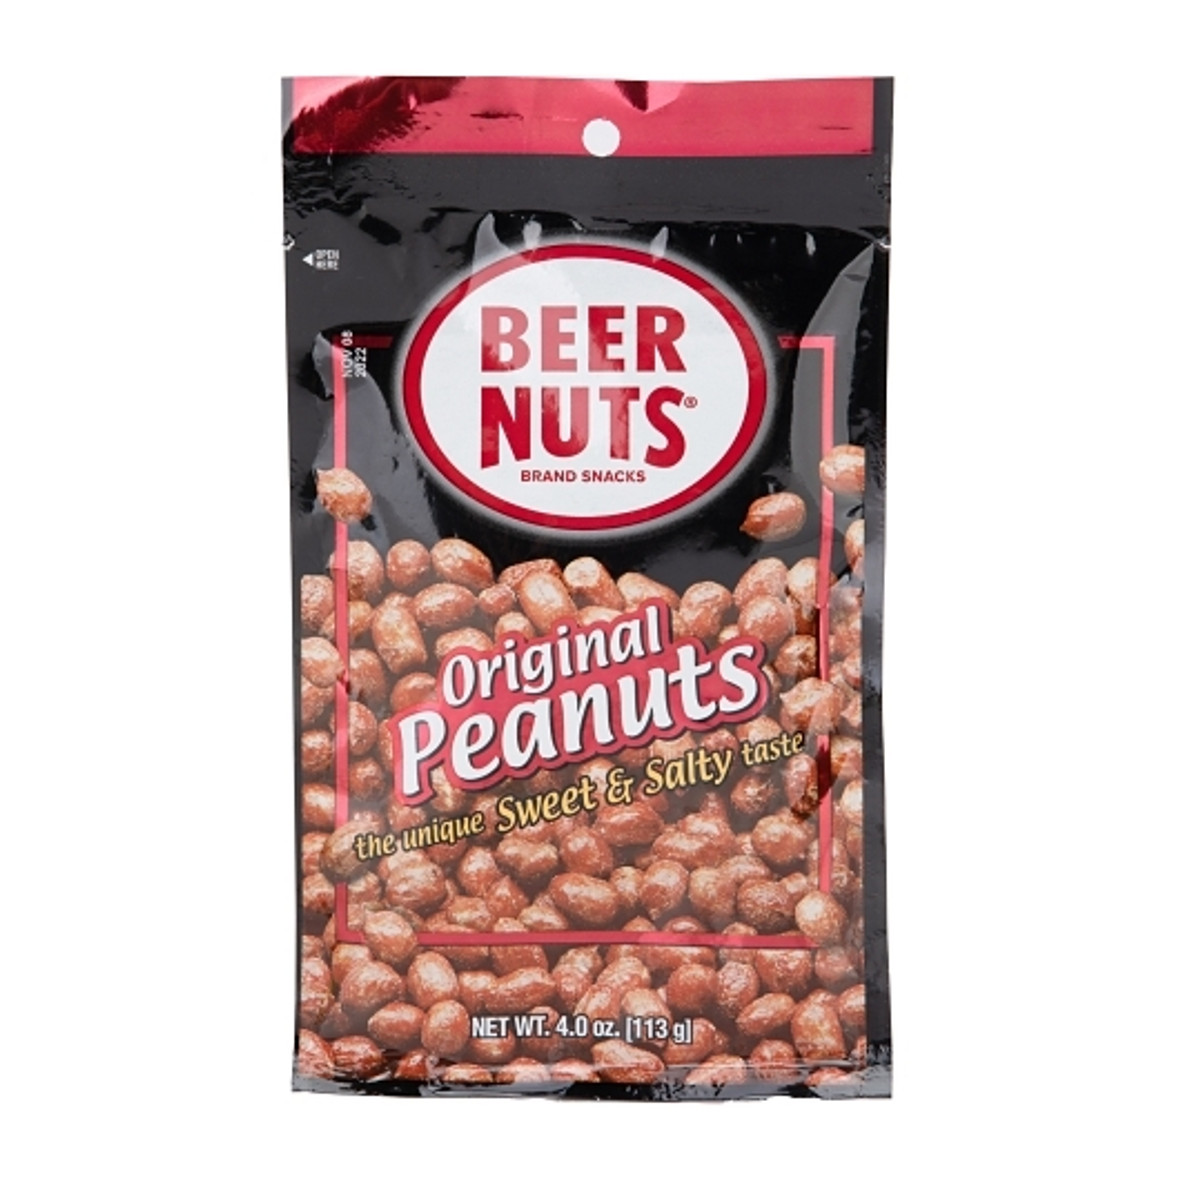 Beer Nuts Original Sweet and Salty Peanuts - Value Pack, 4 Ounce, 12 per case